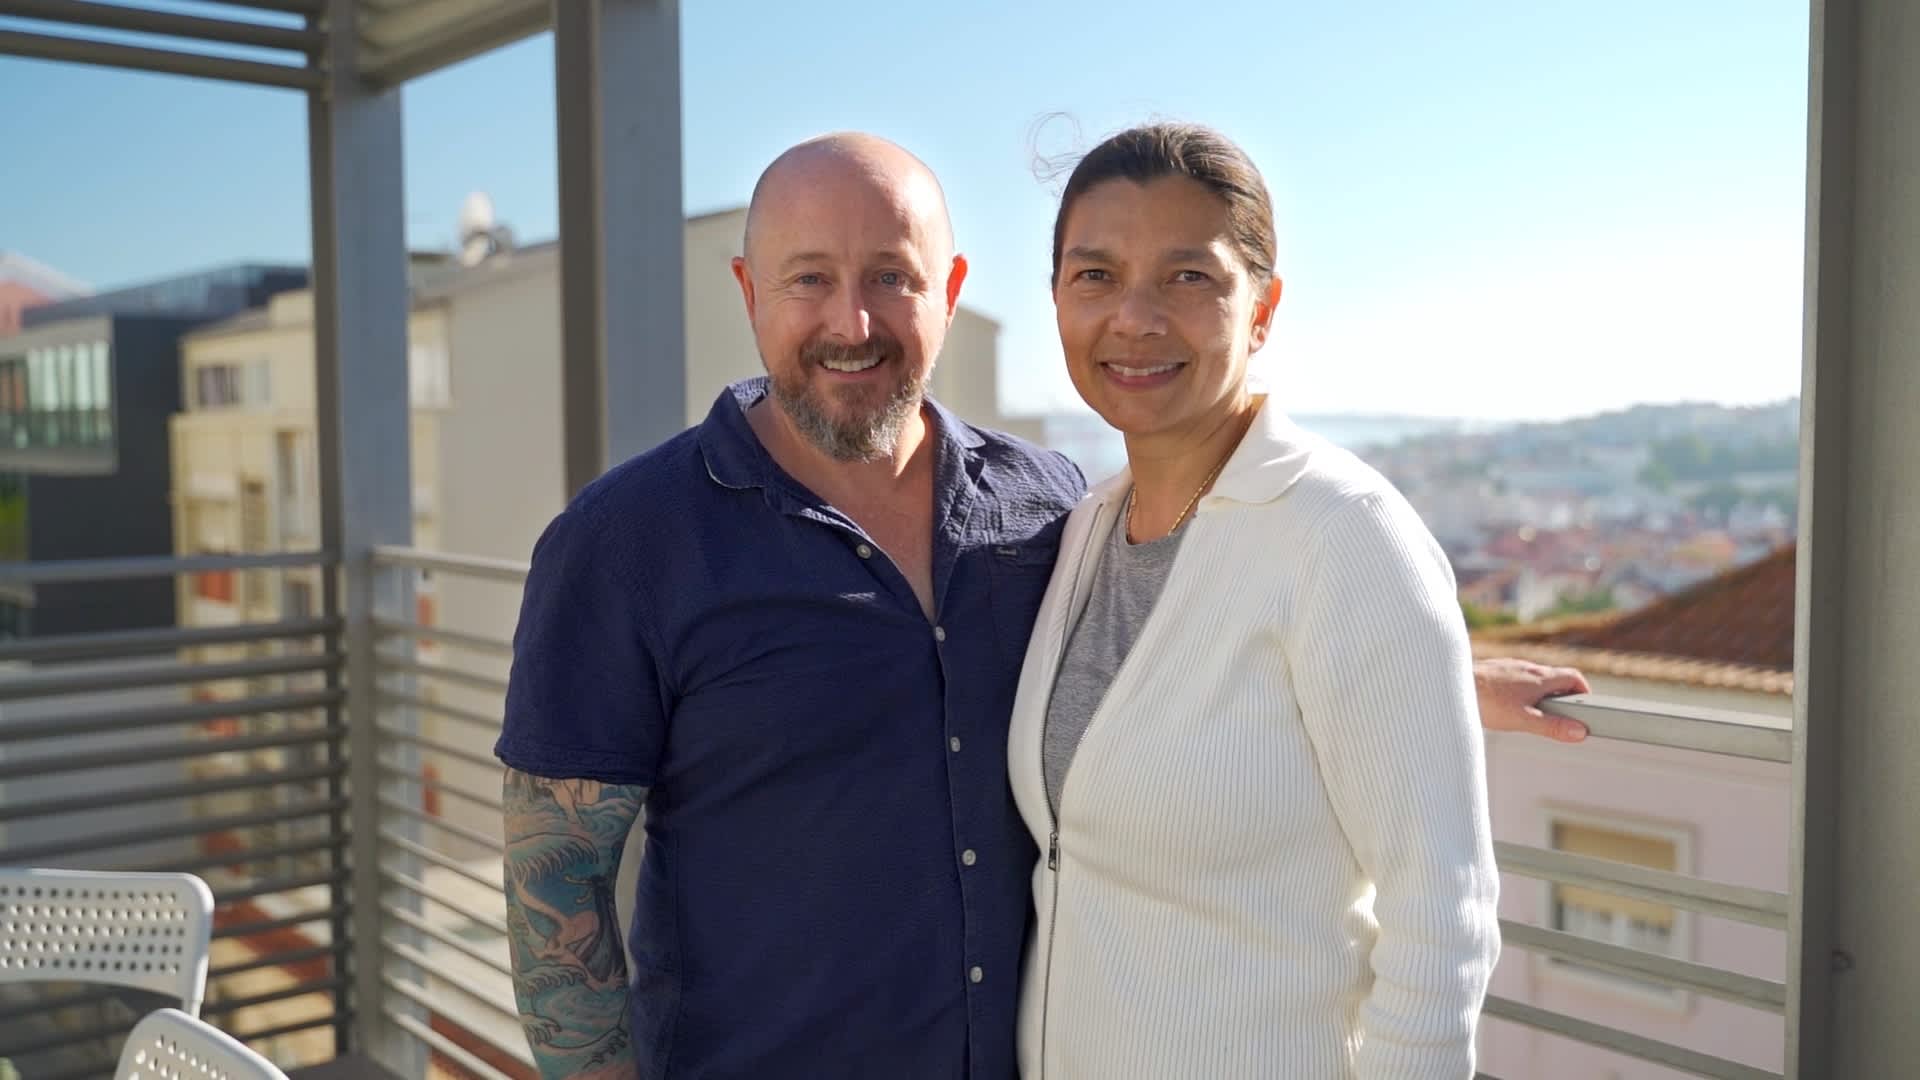 This retired couple left the U.S. and bought a home in Portugal for $534,000—here's a look inside